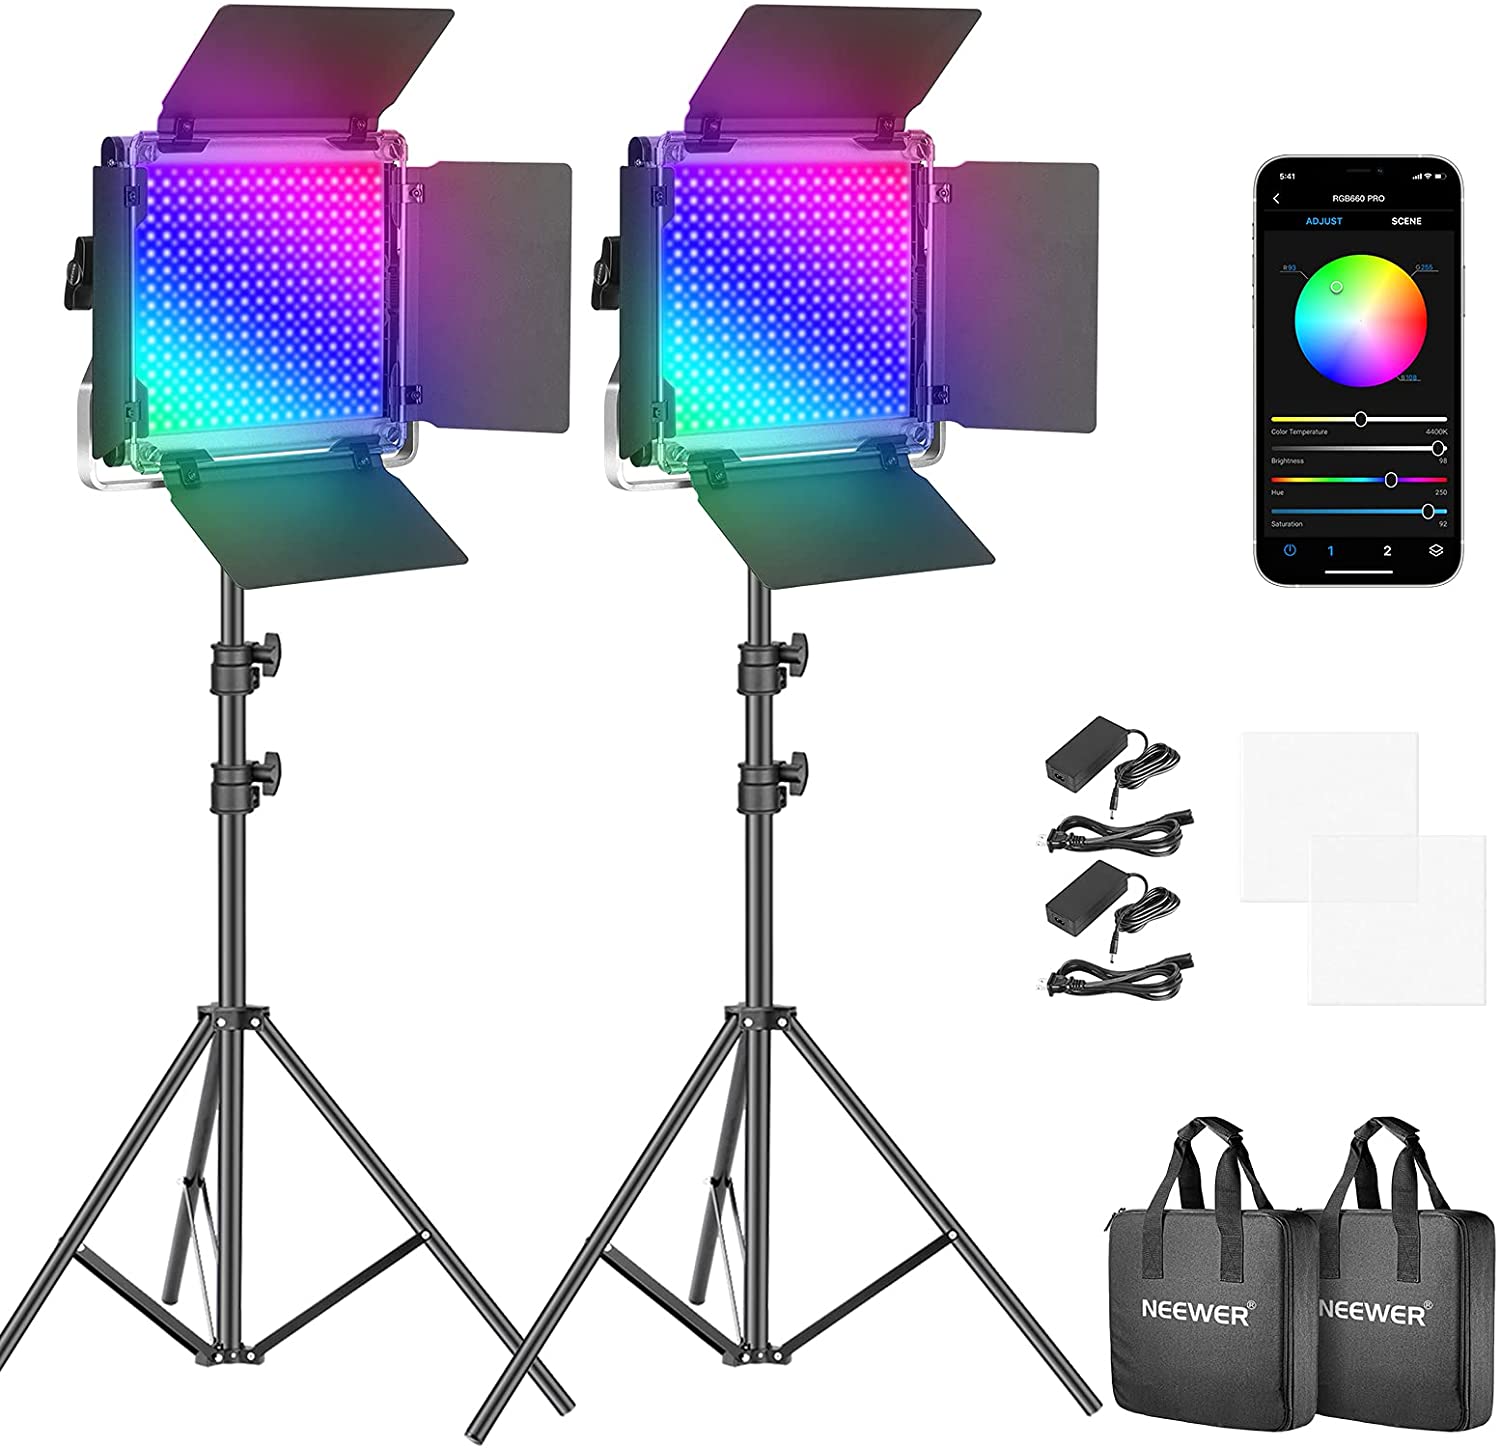 Neewer 660 pro RGB LED video light with app control 360° 